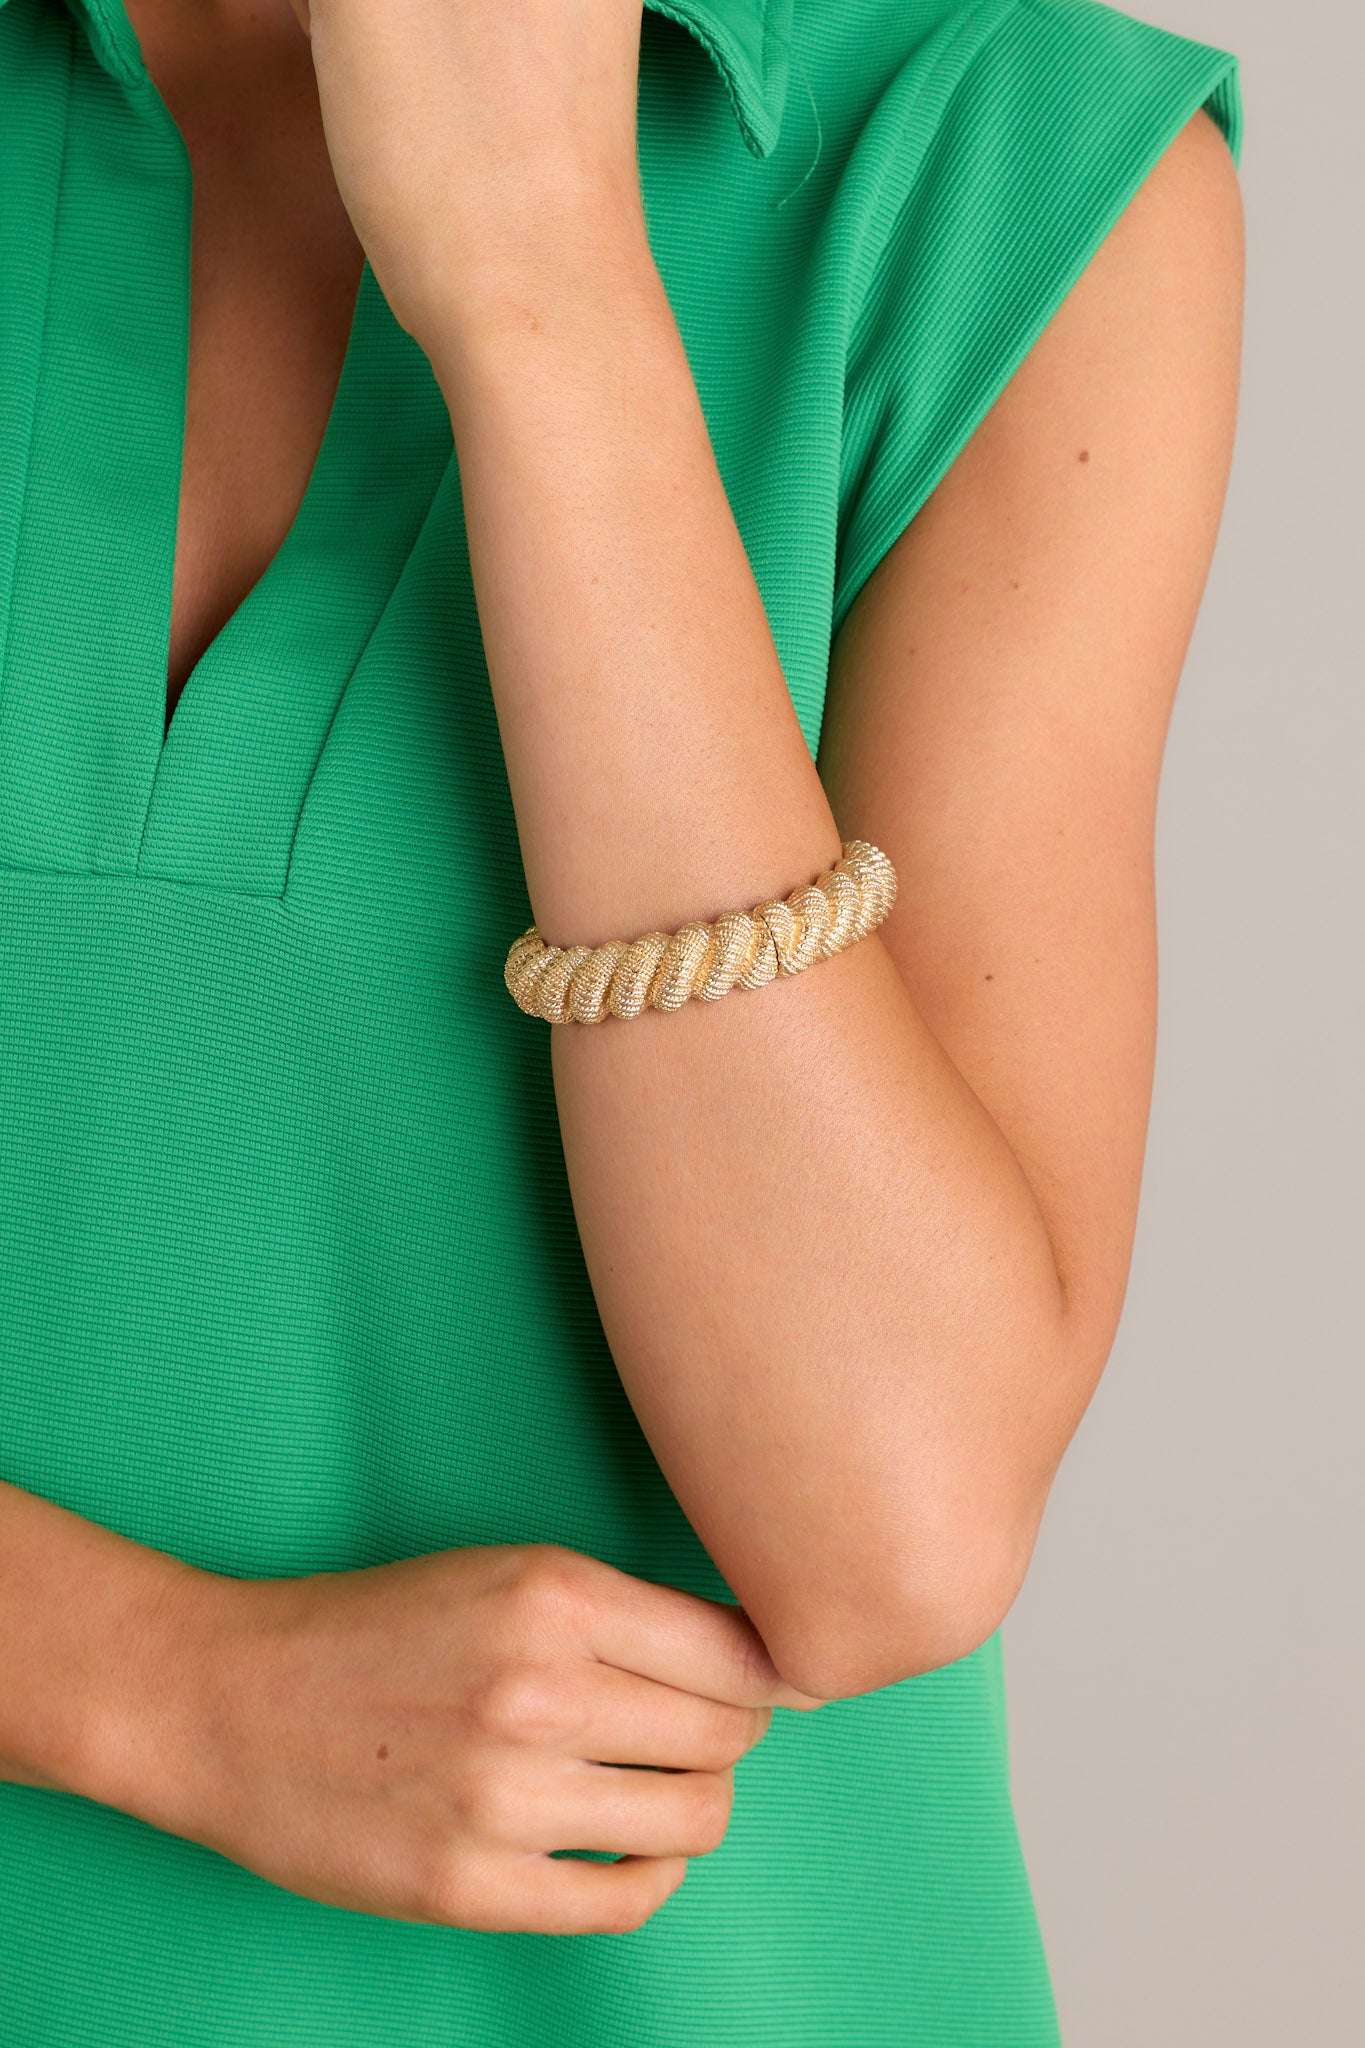 This gold bracelet features gold hardware, a textured rope design, and an elastic band underneath.